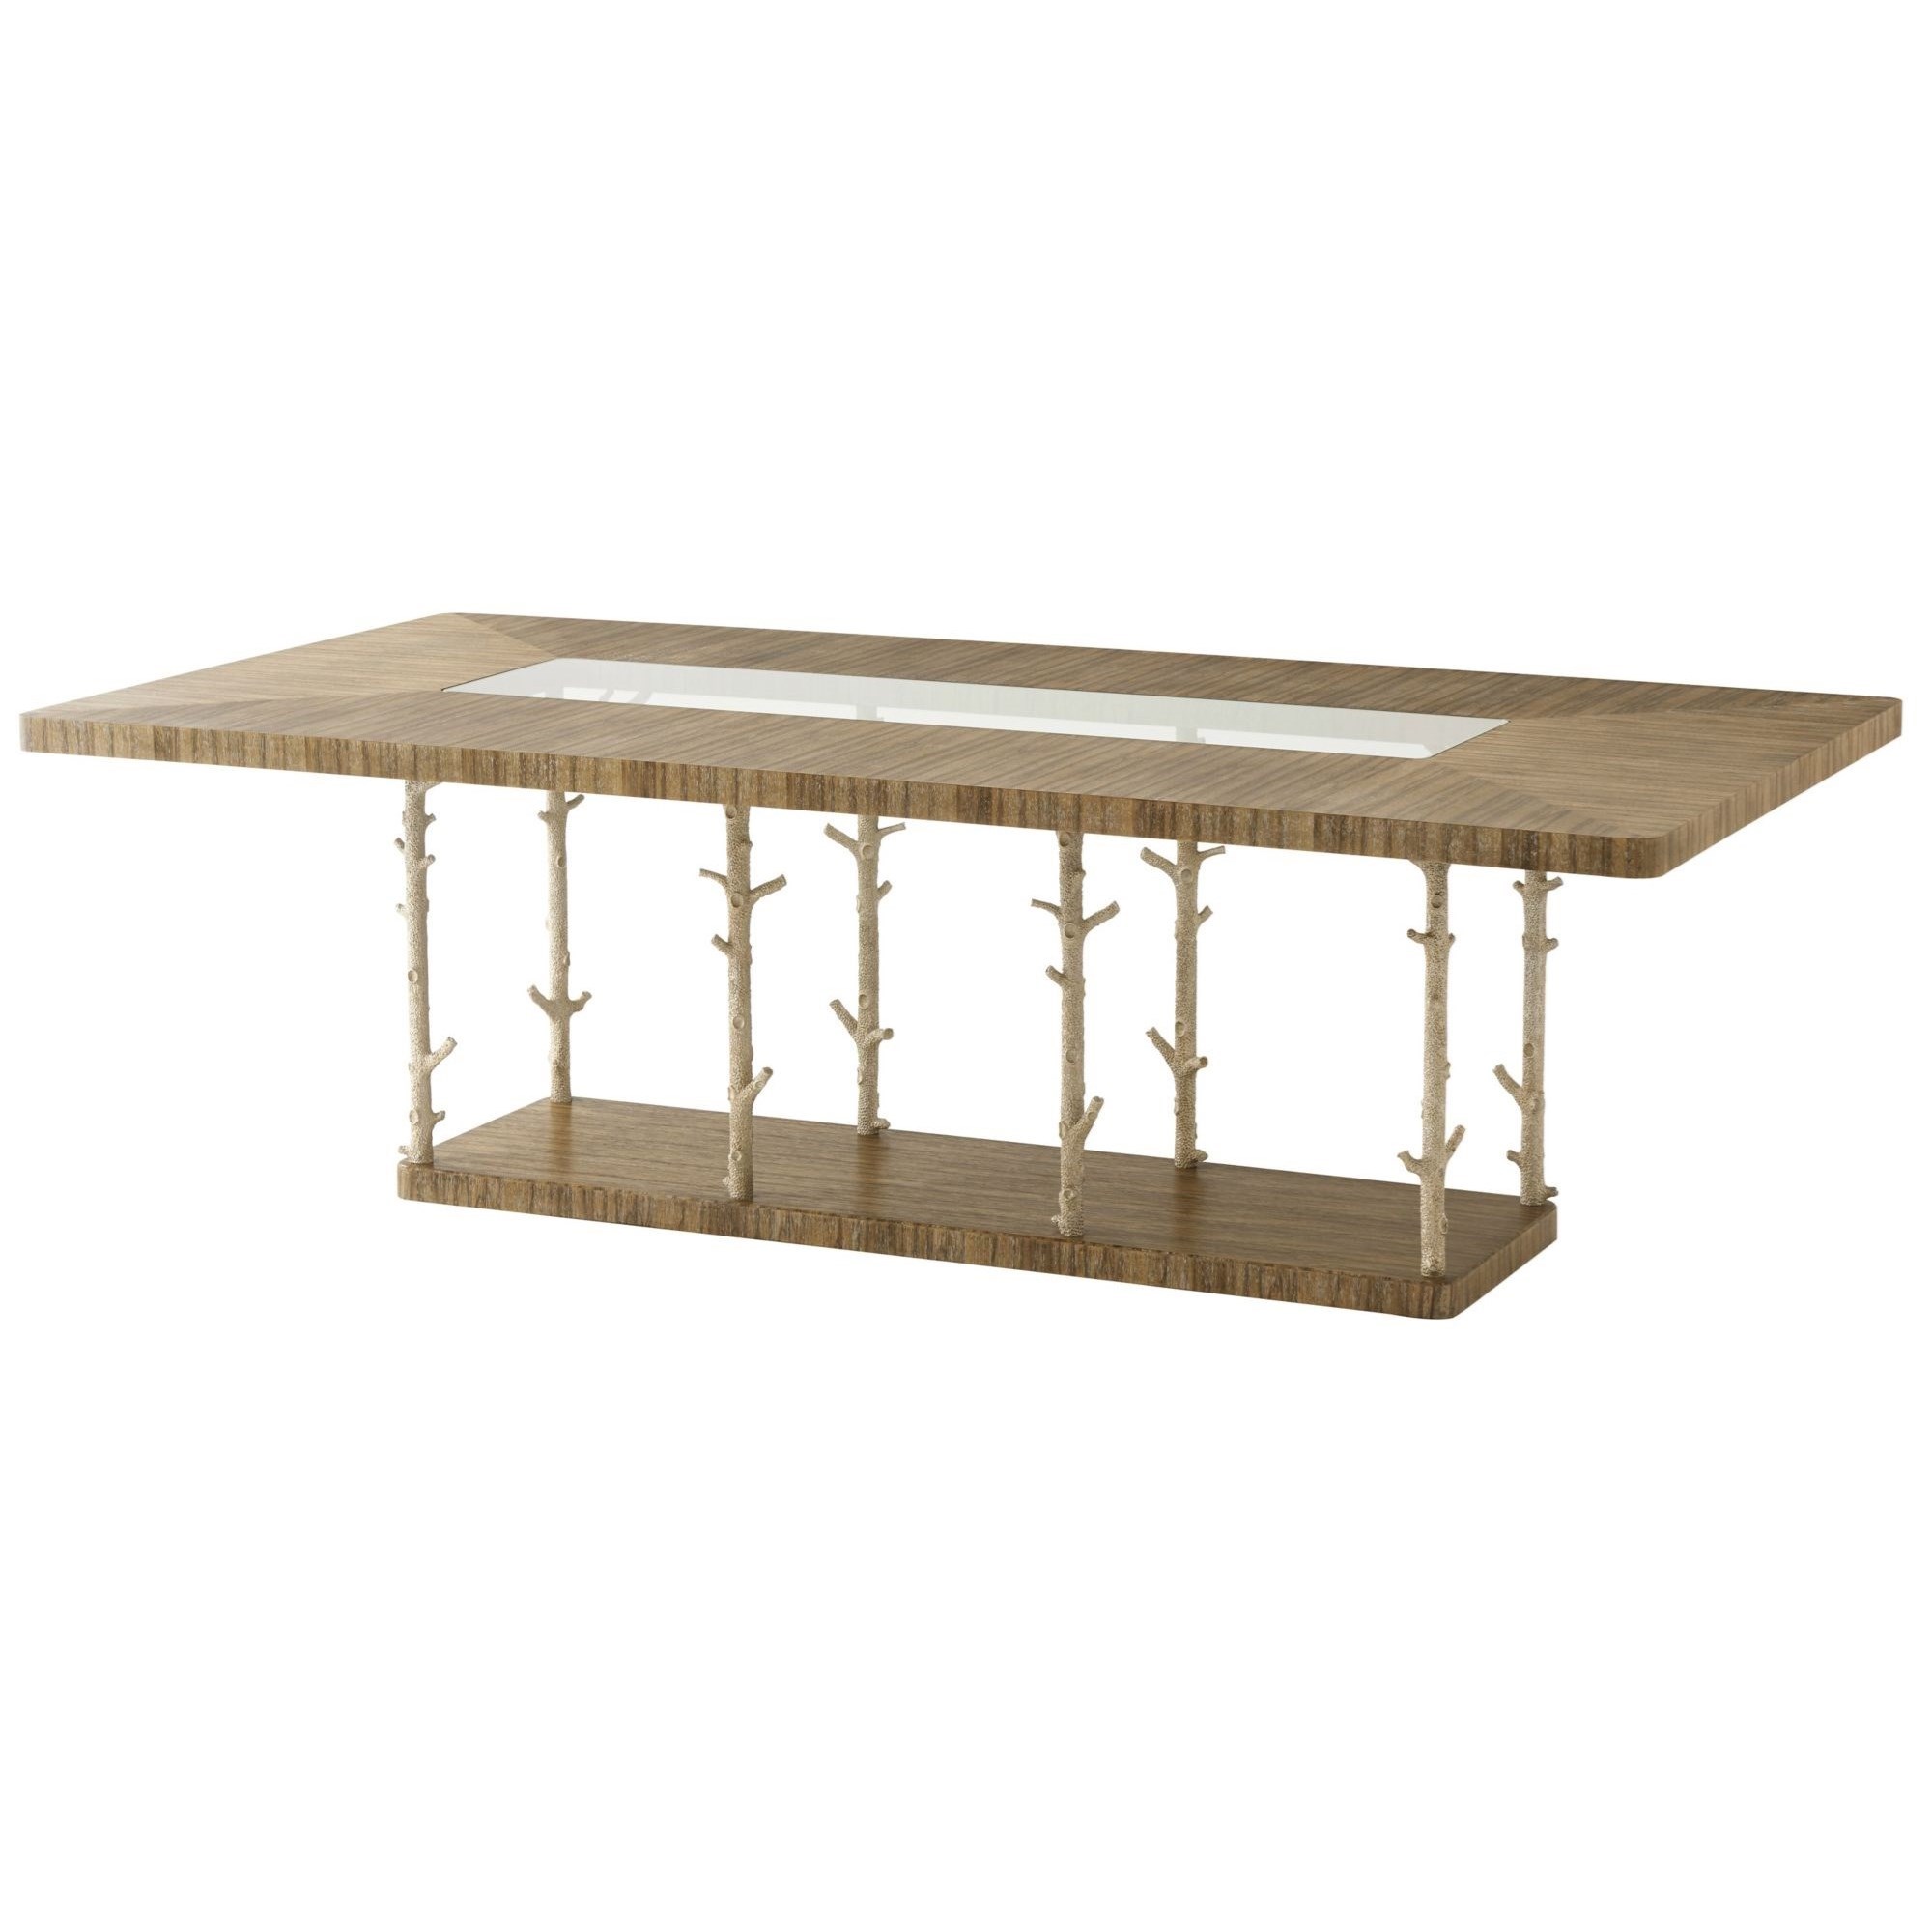 Wynwood II Rectangular Dining Table with Coral Look Posts